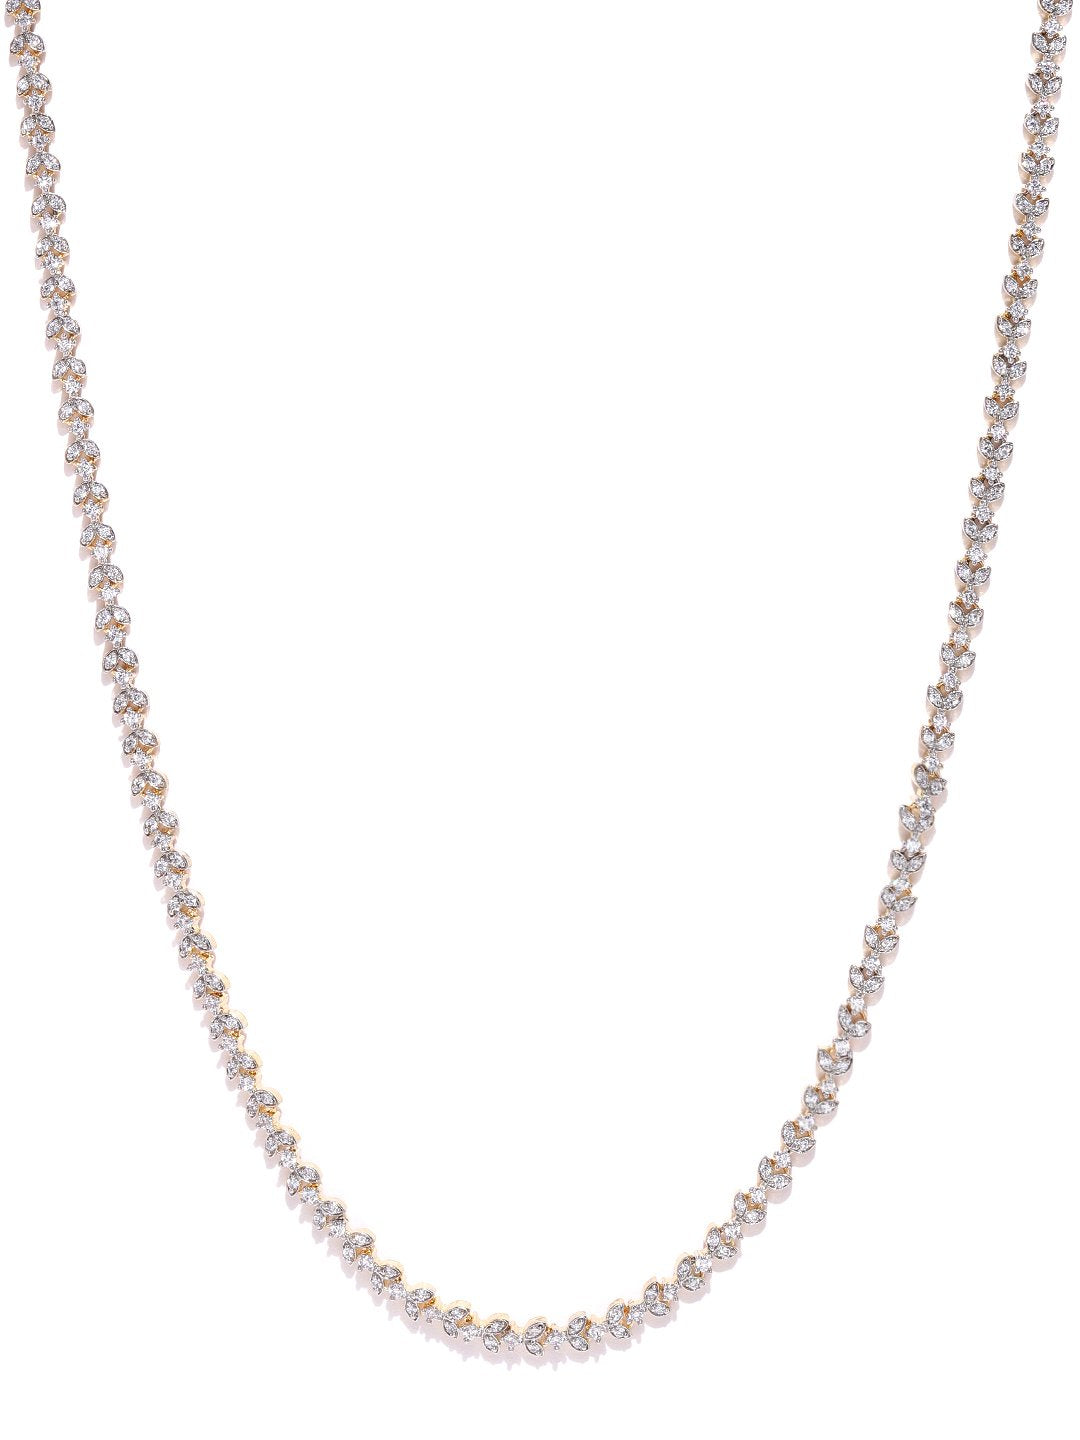 Women's  American Diamond Gold Plated Floral Necklace - Priyaasi